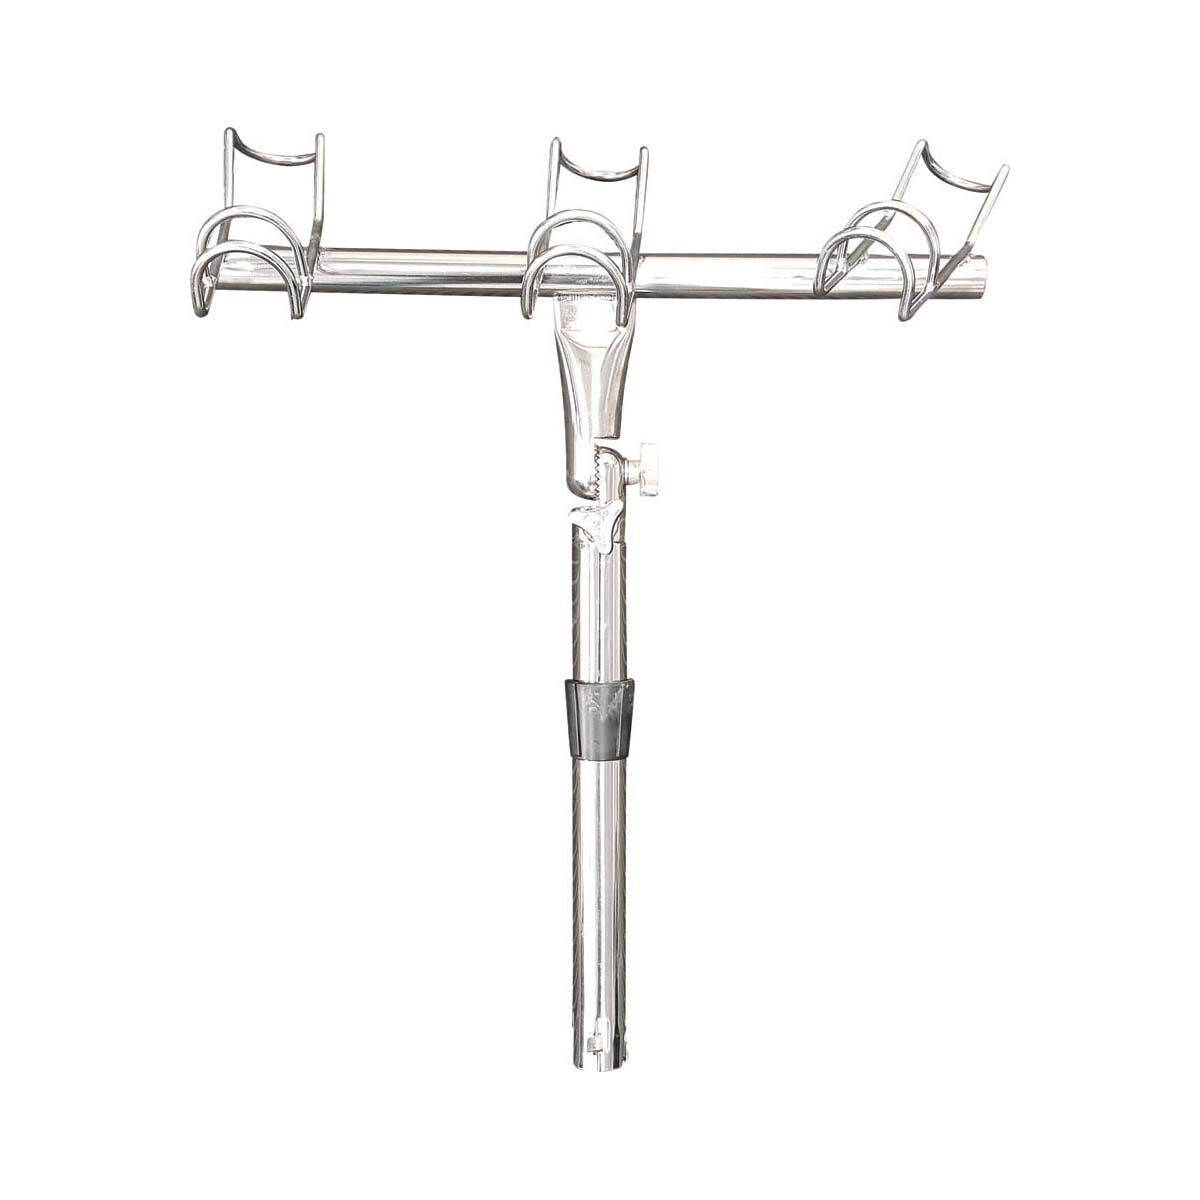 316 STAINLESS STEEL 3-in-1 ROD HOLDER 3-WAY BOAT SNAPPER FISHING PORT SIDE 